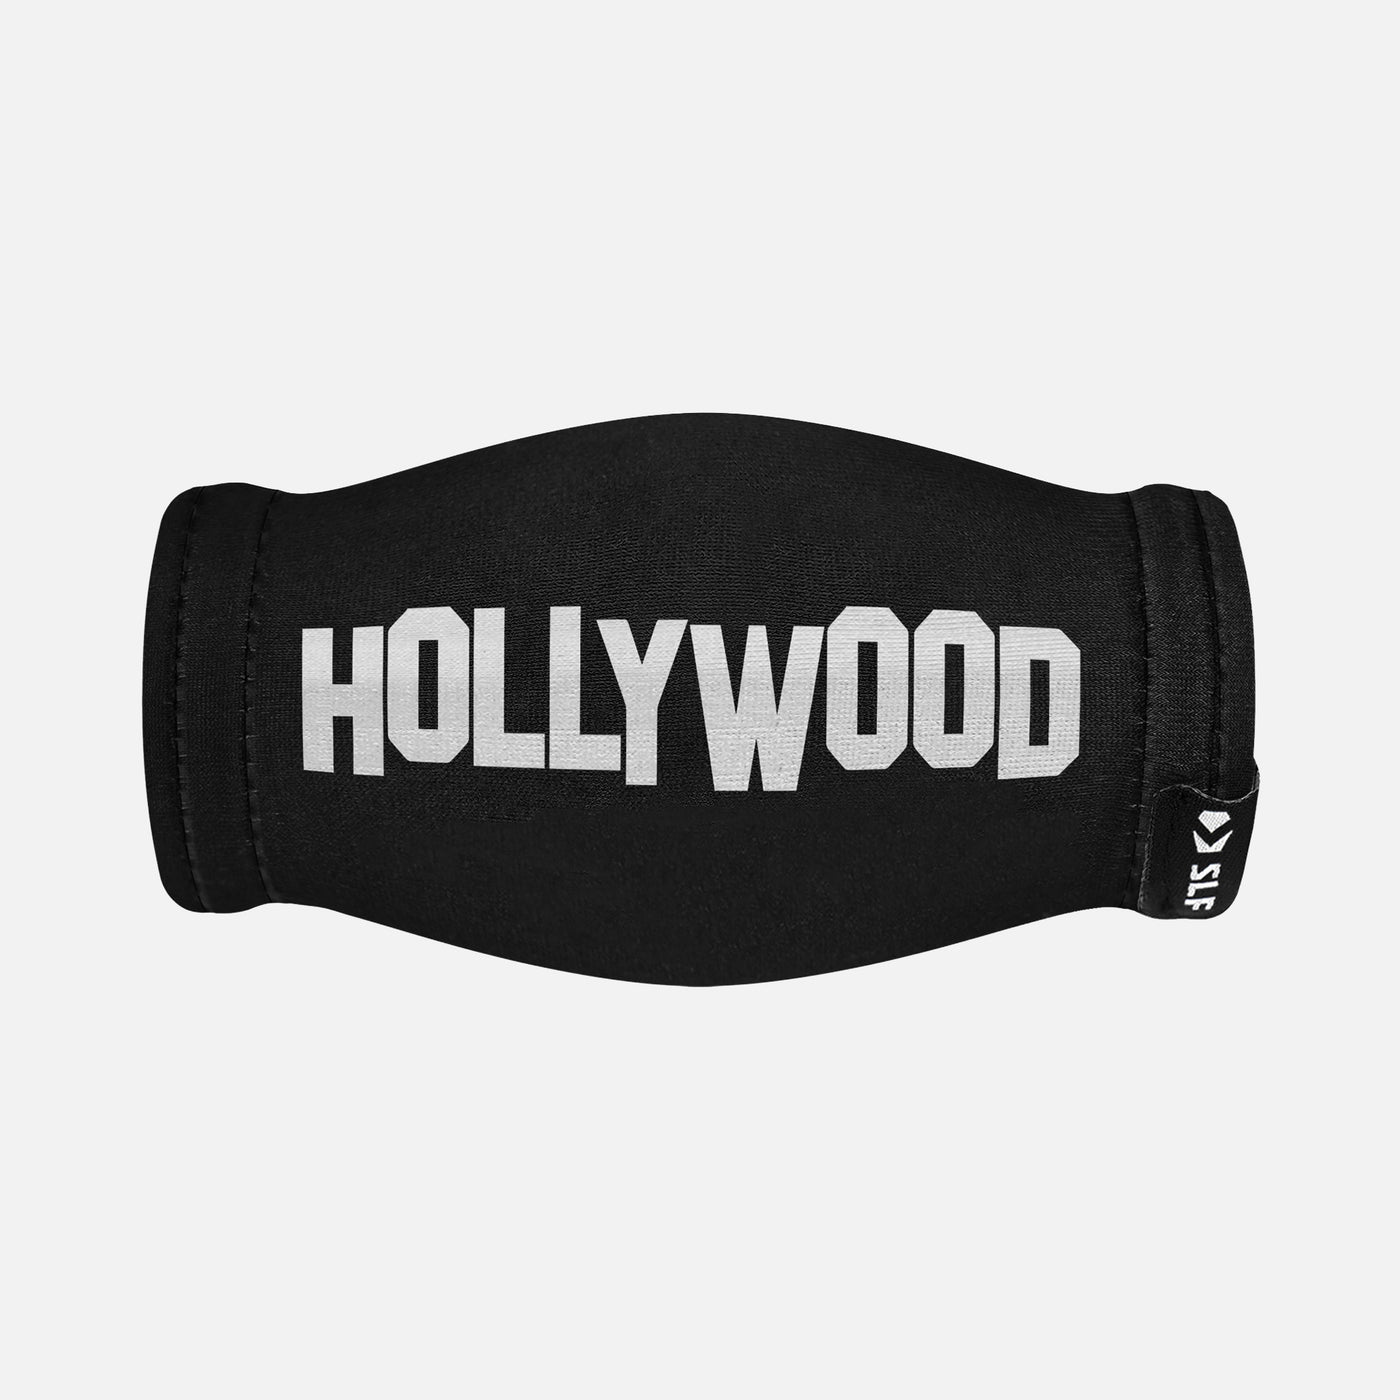 Hollywood Chin Strap Cover